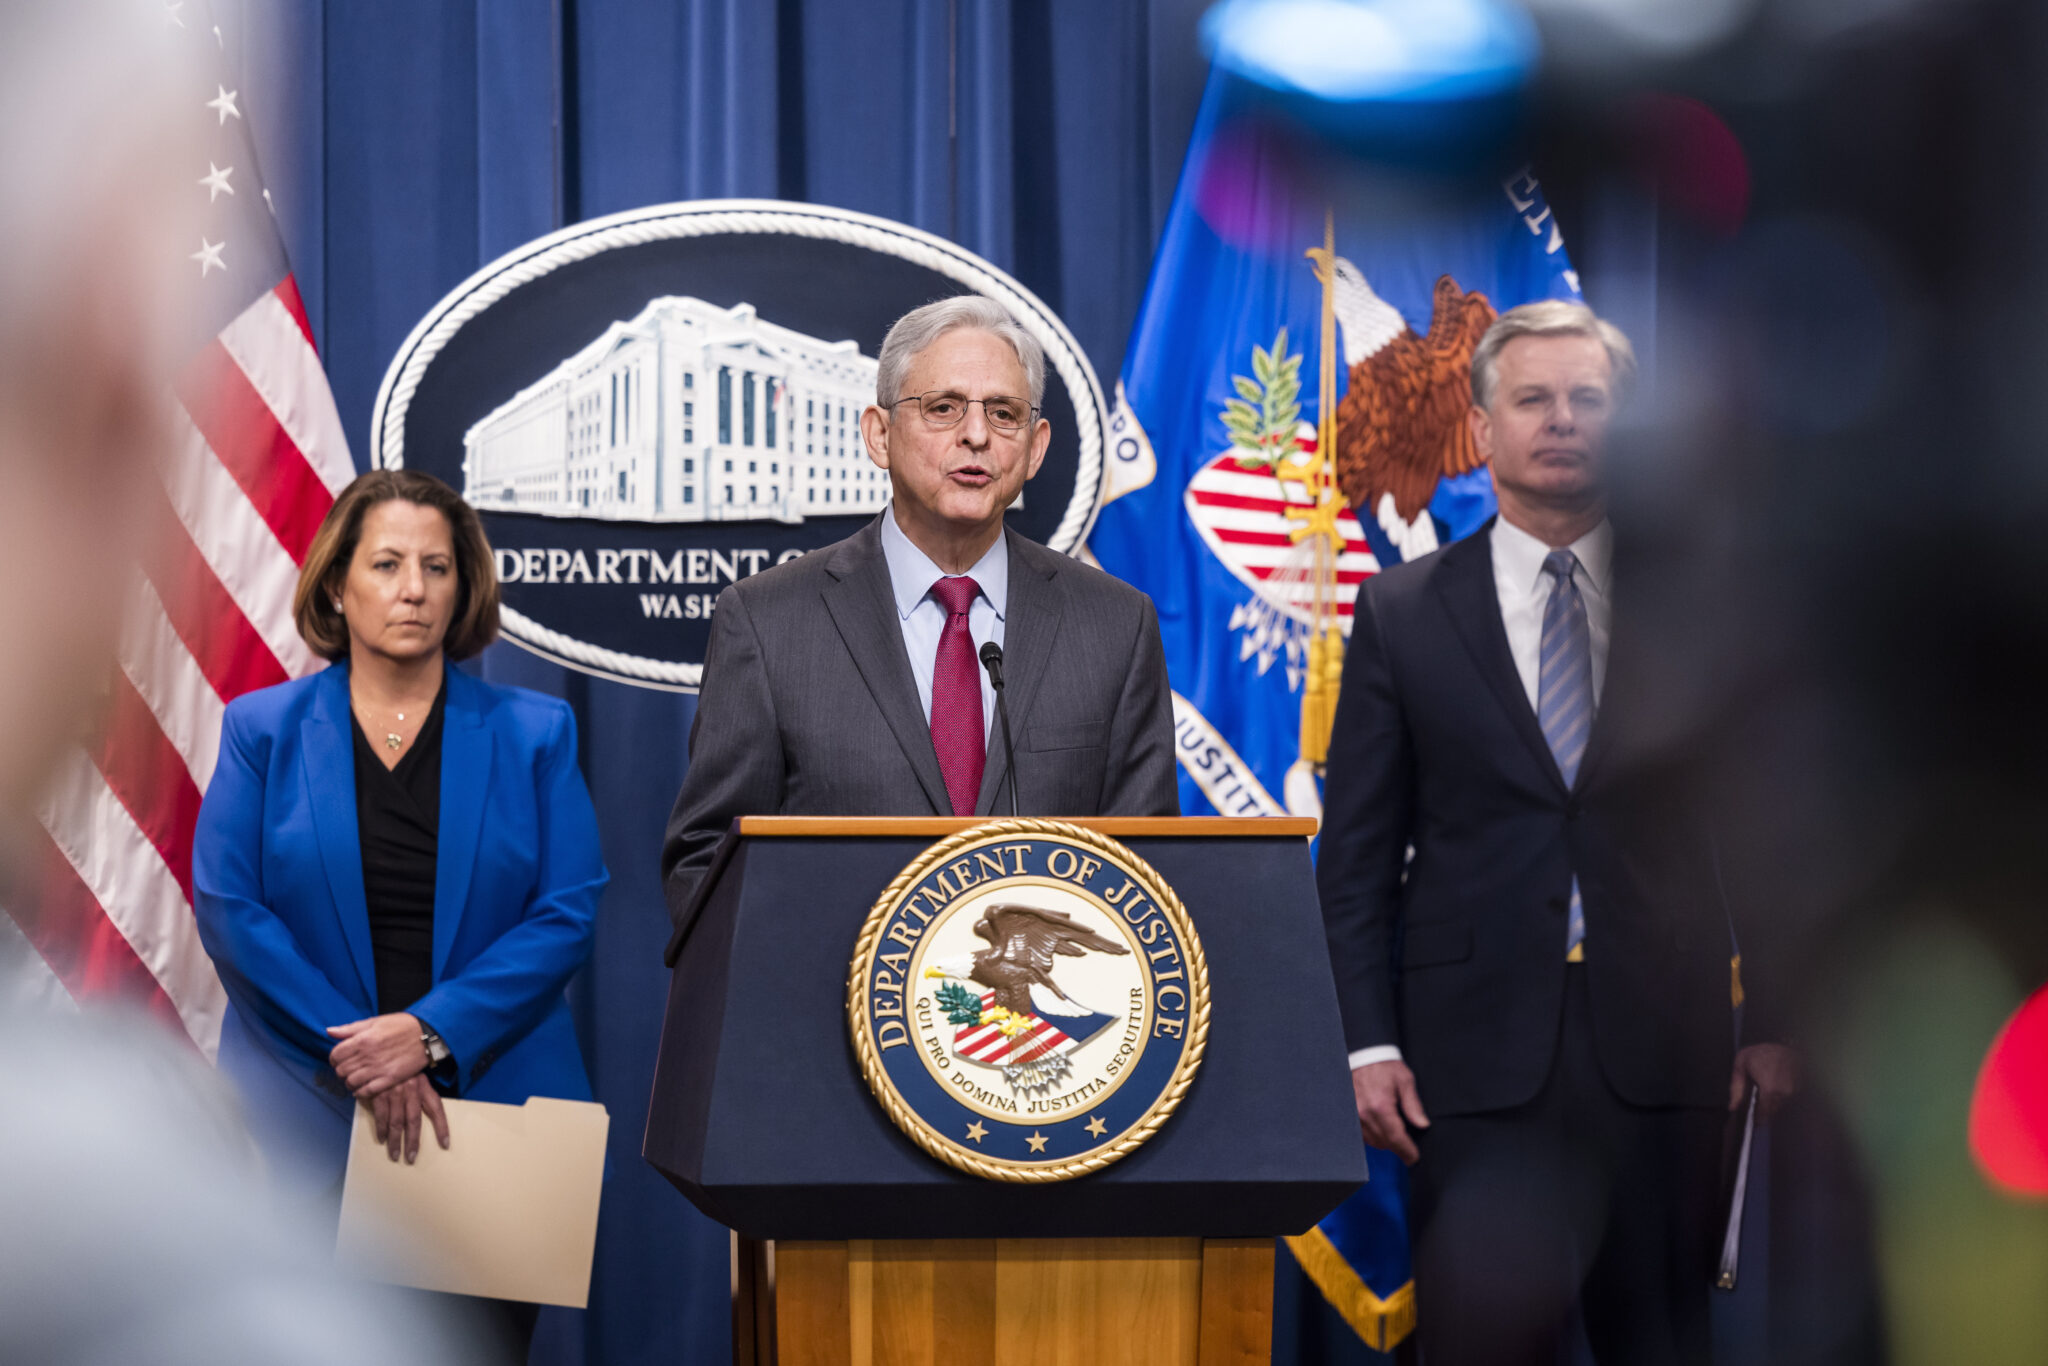 Attorney General Merrick Garland (C), FBI Director Christopher Wray (R), and Deputy Attorney General Lisa Monaco (L) announce the seizure of Hive ransomware's website off the so-called dark-web at the Justice Department in Washington, DC, USA, 26 January 2023. The ransomware site was reportedly used to extort more than 100 USD million from victims worldwide. Photo: picture alliance/EPA/JIM LO SCALZO